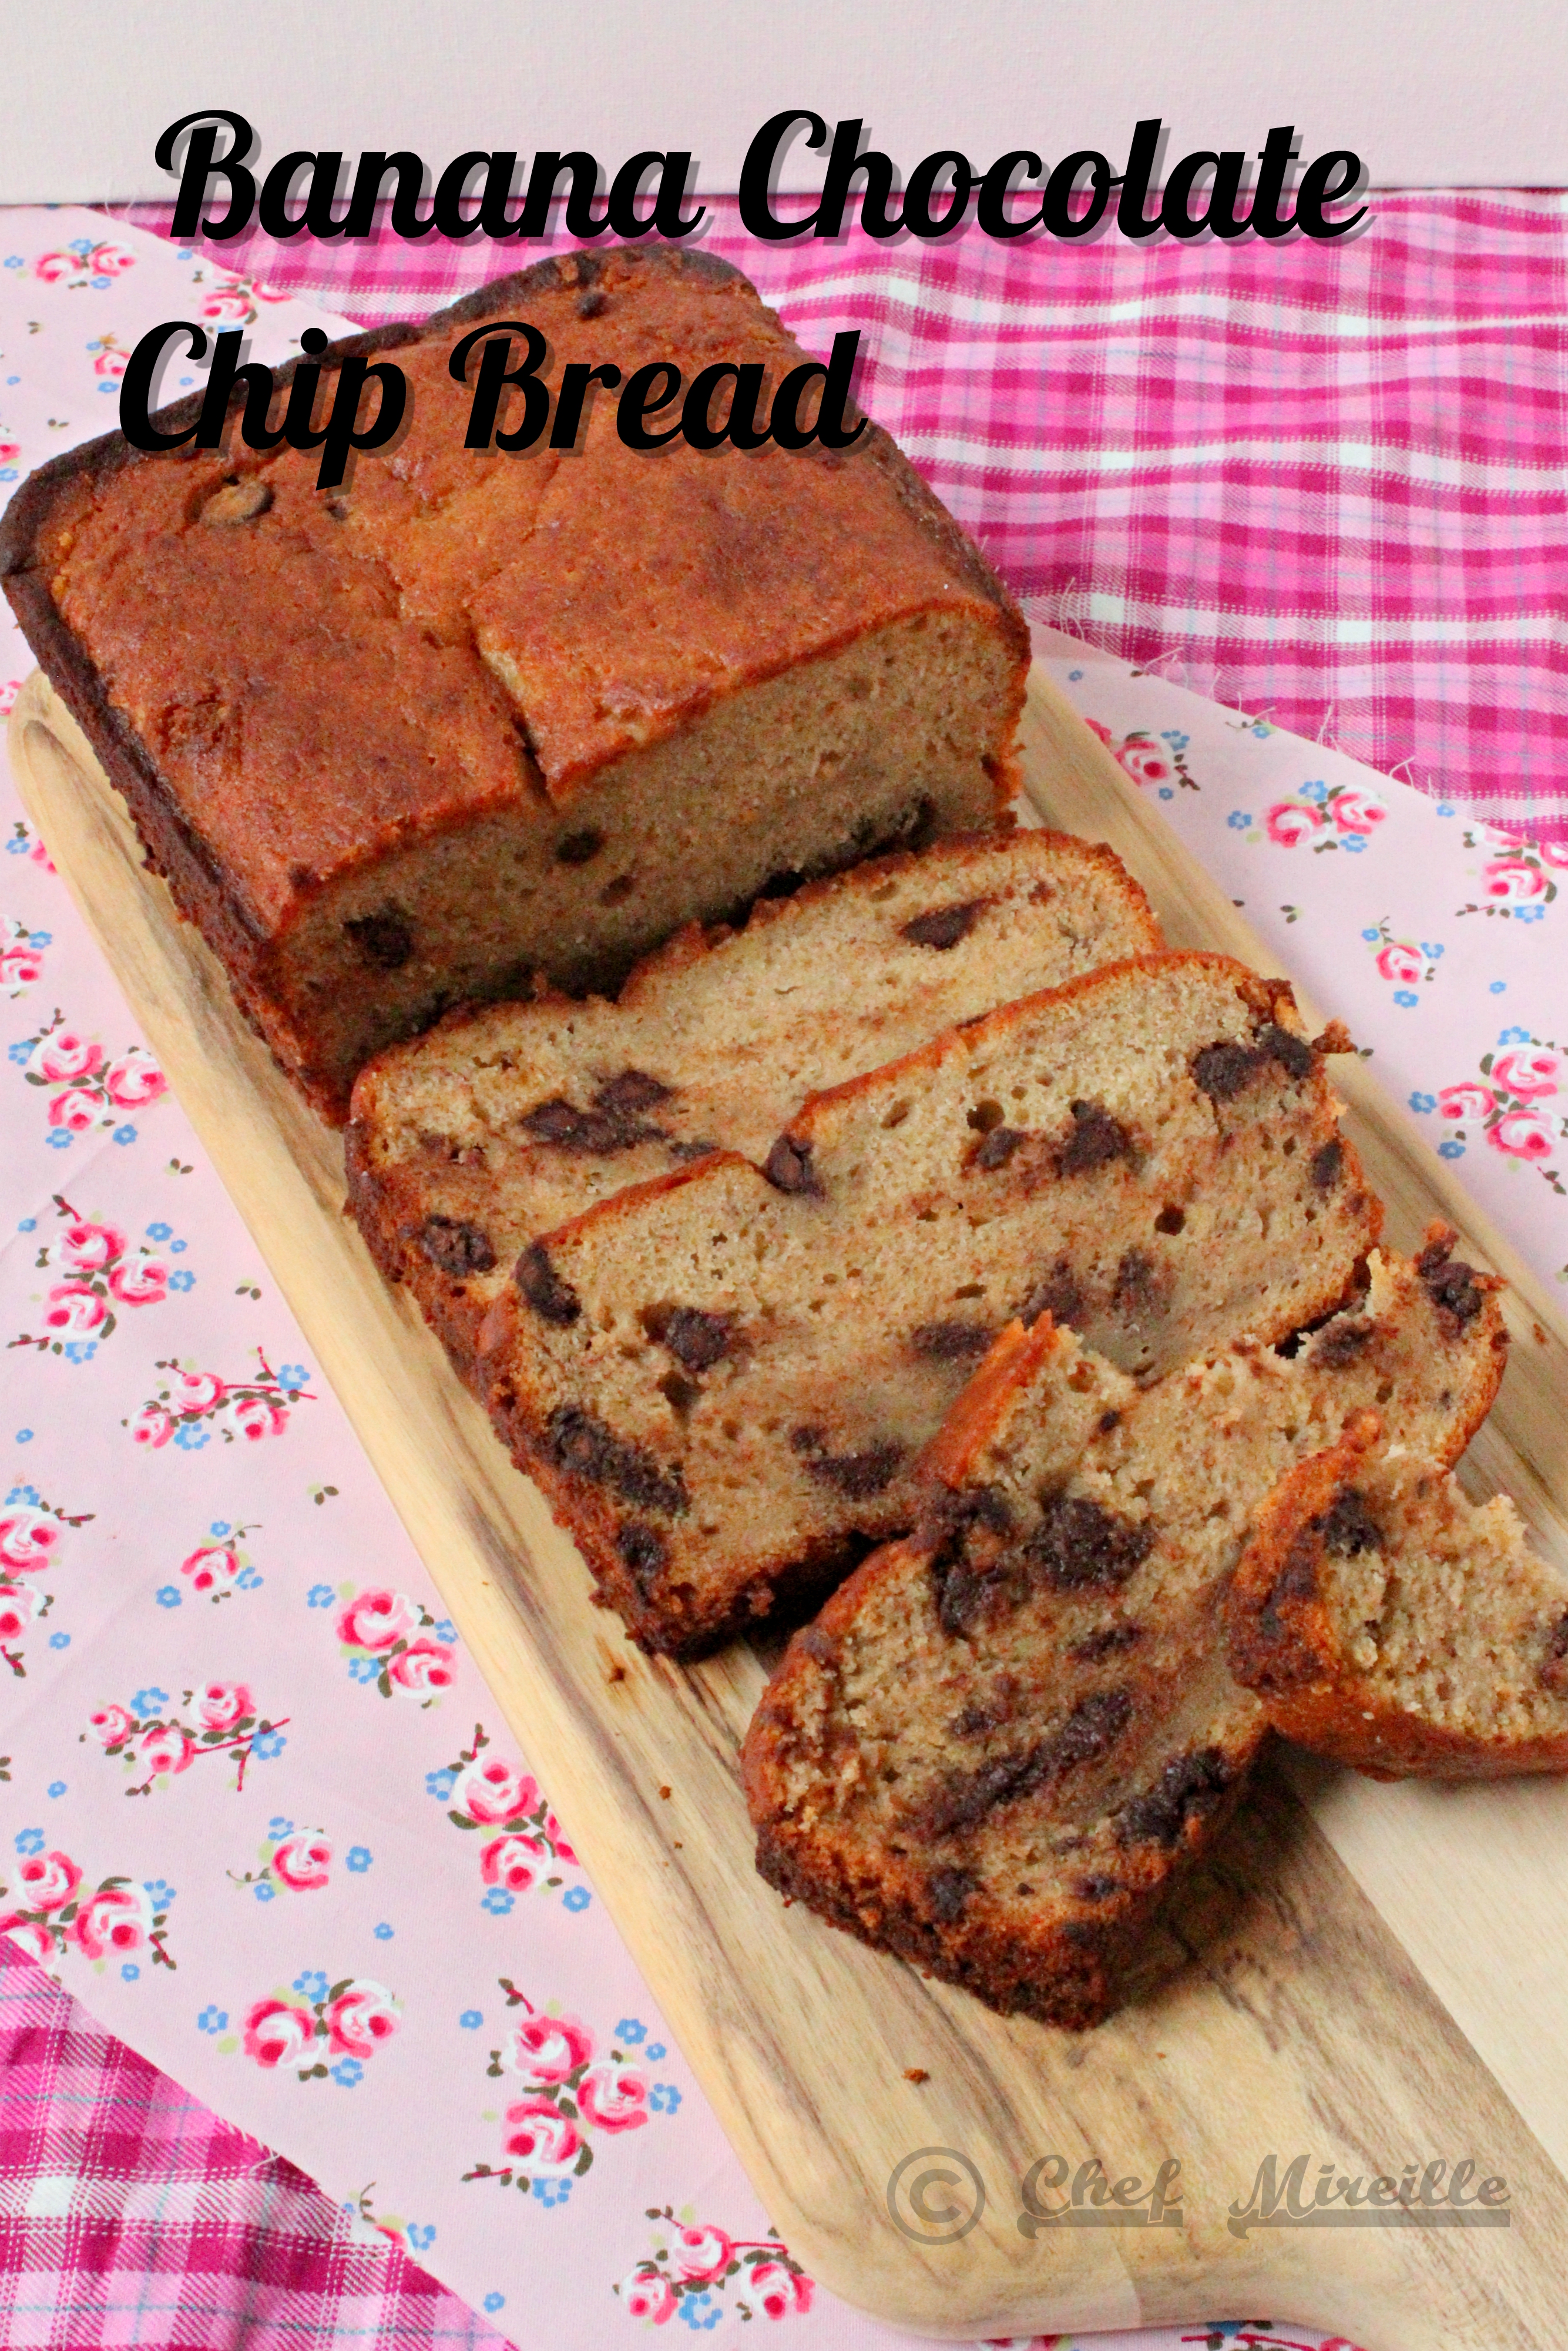 Banana Chocolate Chip Bread with text